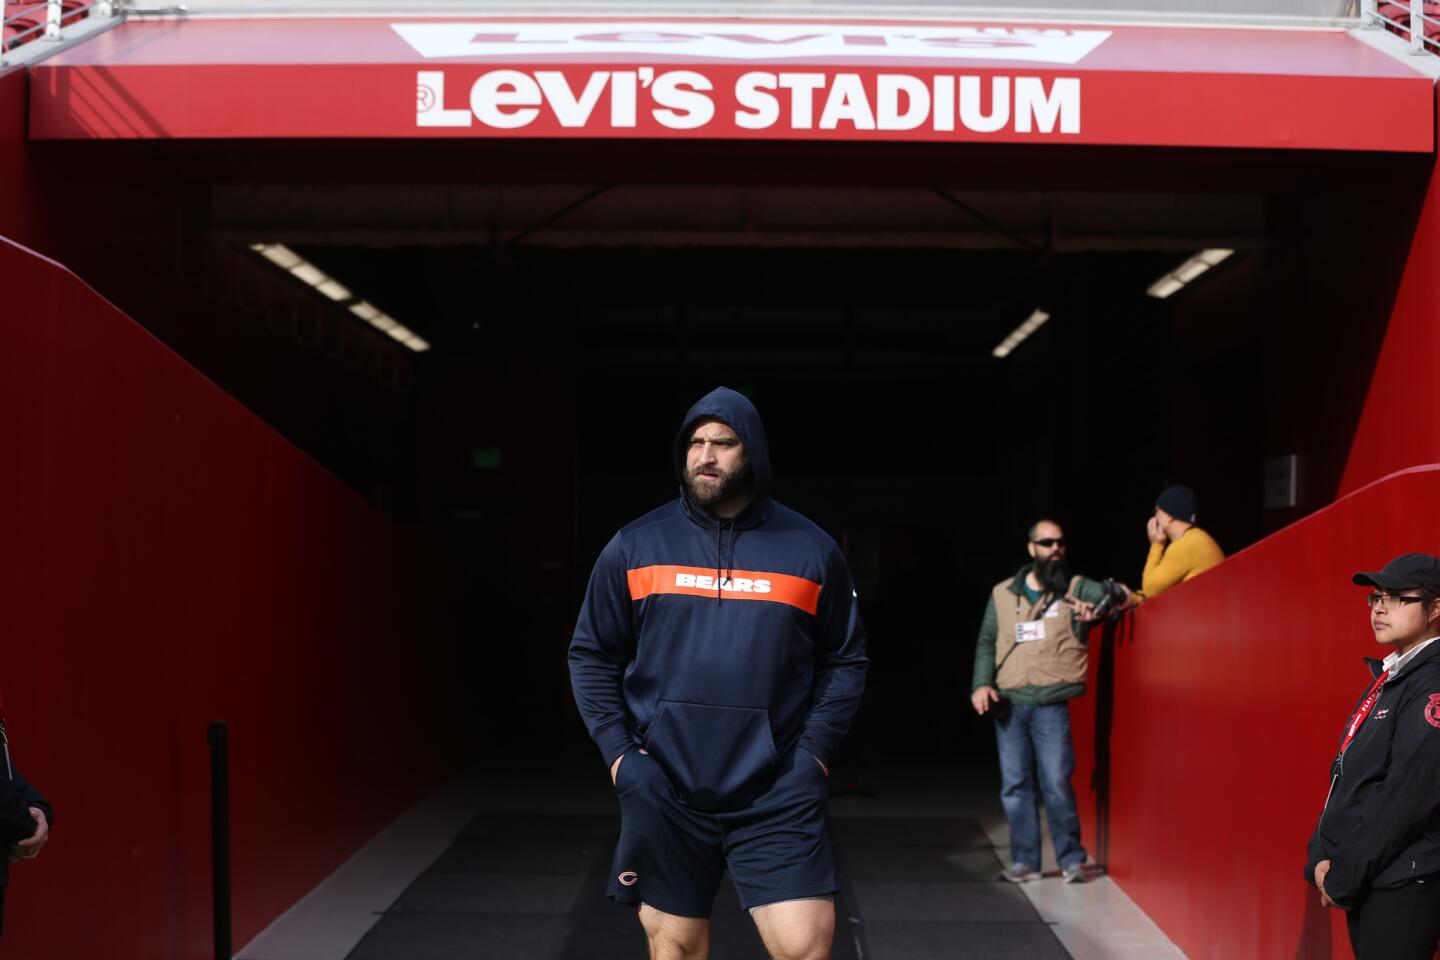 Bears offensive guard Kyle Long walks out for warmups before a game against the 49ers on Dec. 23, 2018, in Santa Clara, Calif.